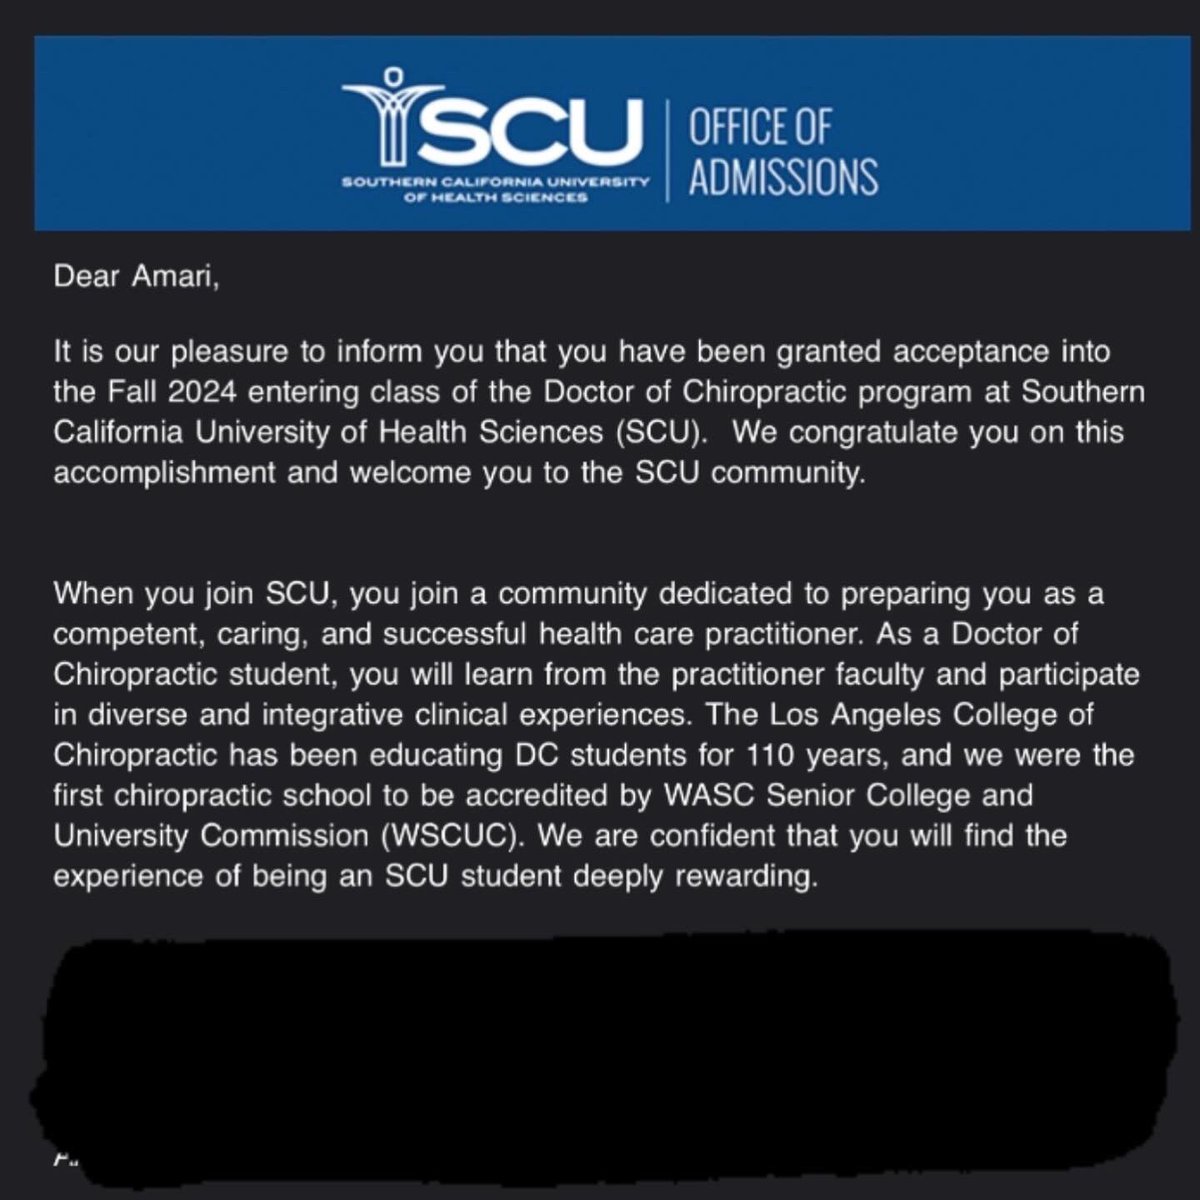 I am EXCITED to announce that I have been accepted to SCU to pursue my doctorate degree in the chiropractic field!👨🏾‍⚕️🩻

#blackdoctors #blackmeninmedicine #MedTwitter #firstgeninmedicine #blackchiropractors